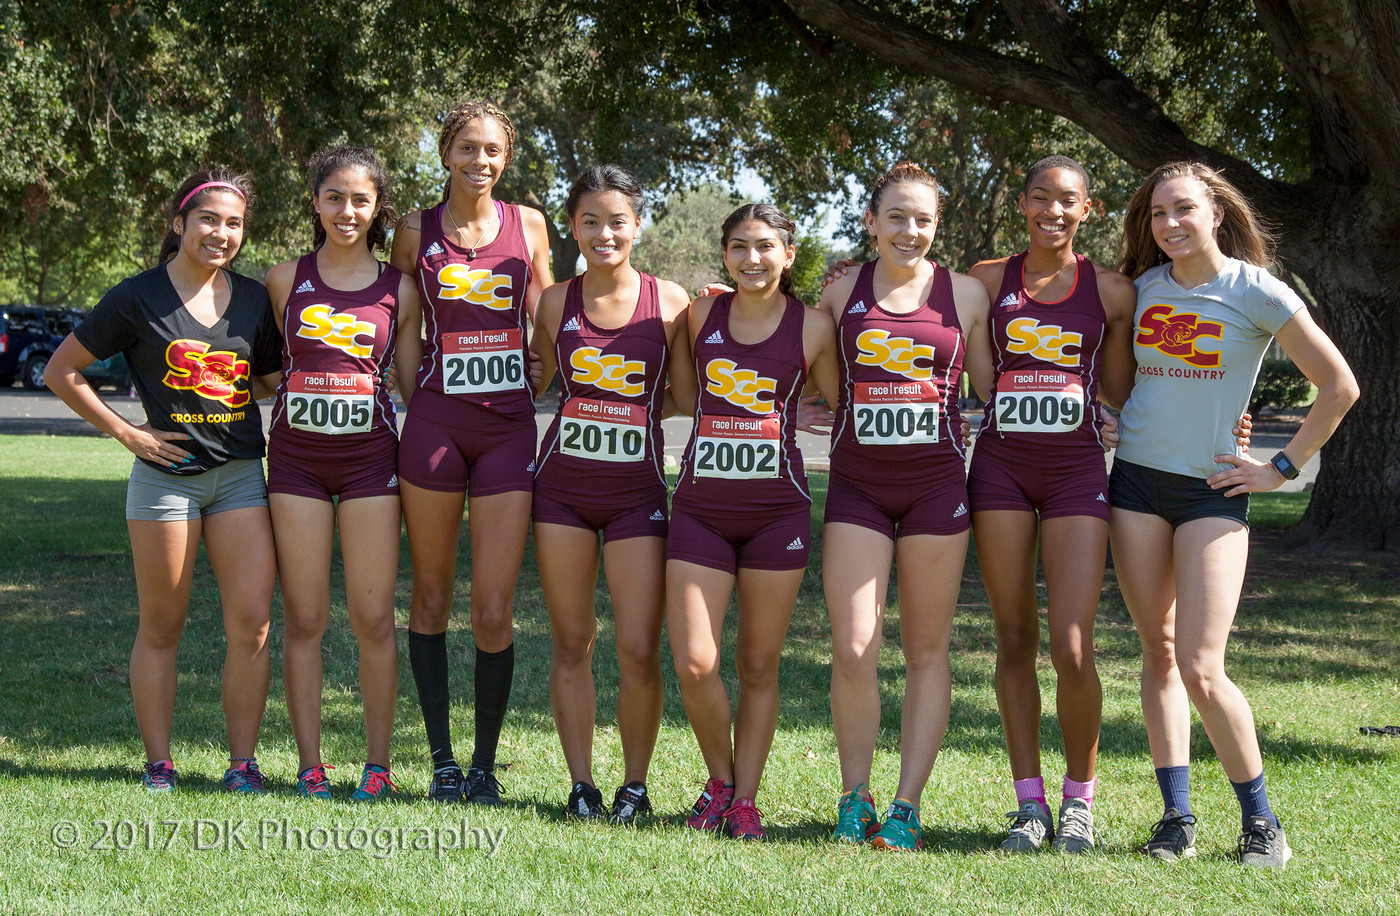 City wins the MJC Invitational with 5 runners finishing in the Top 10